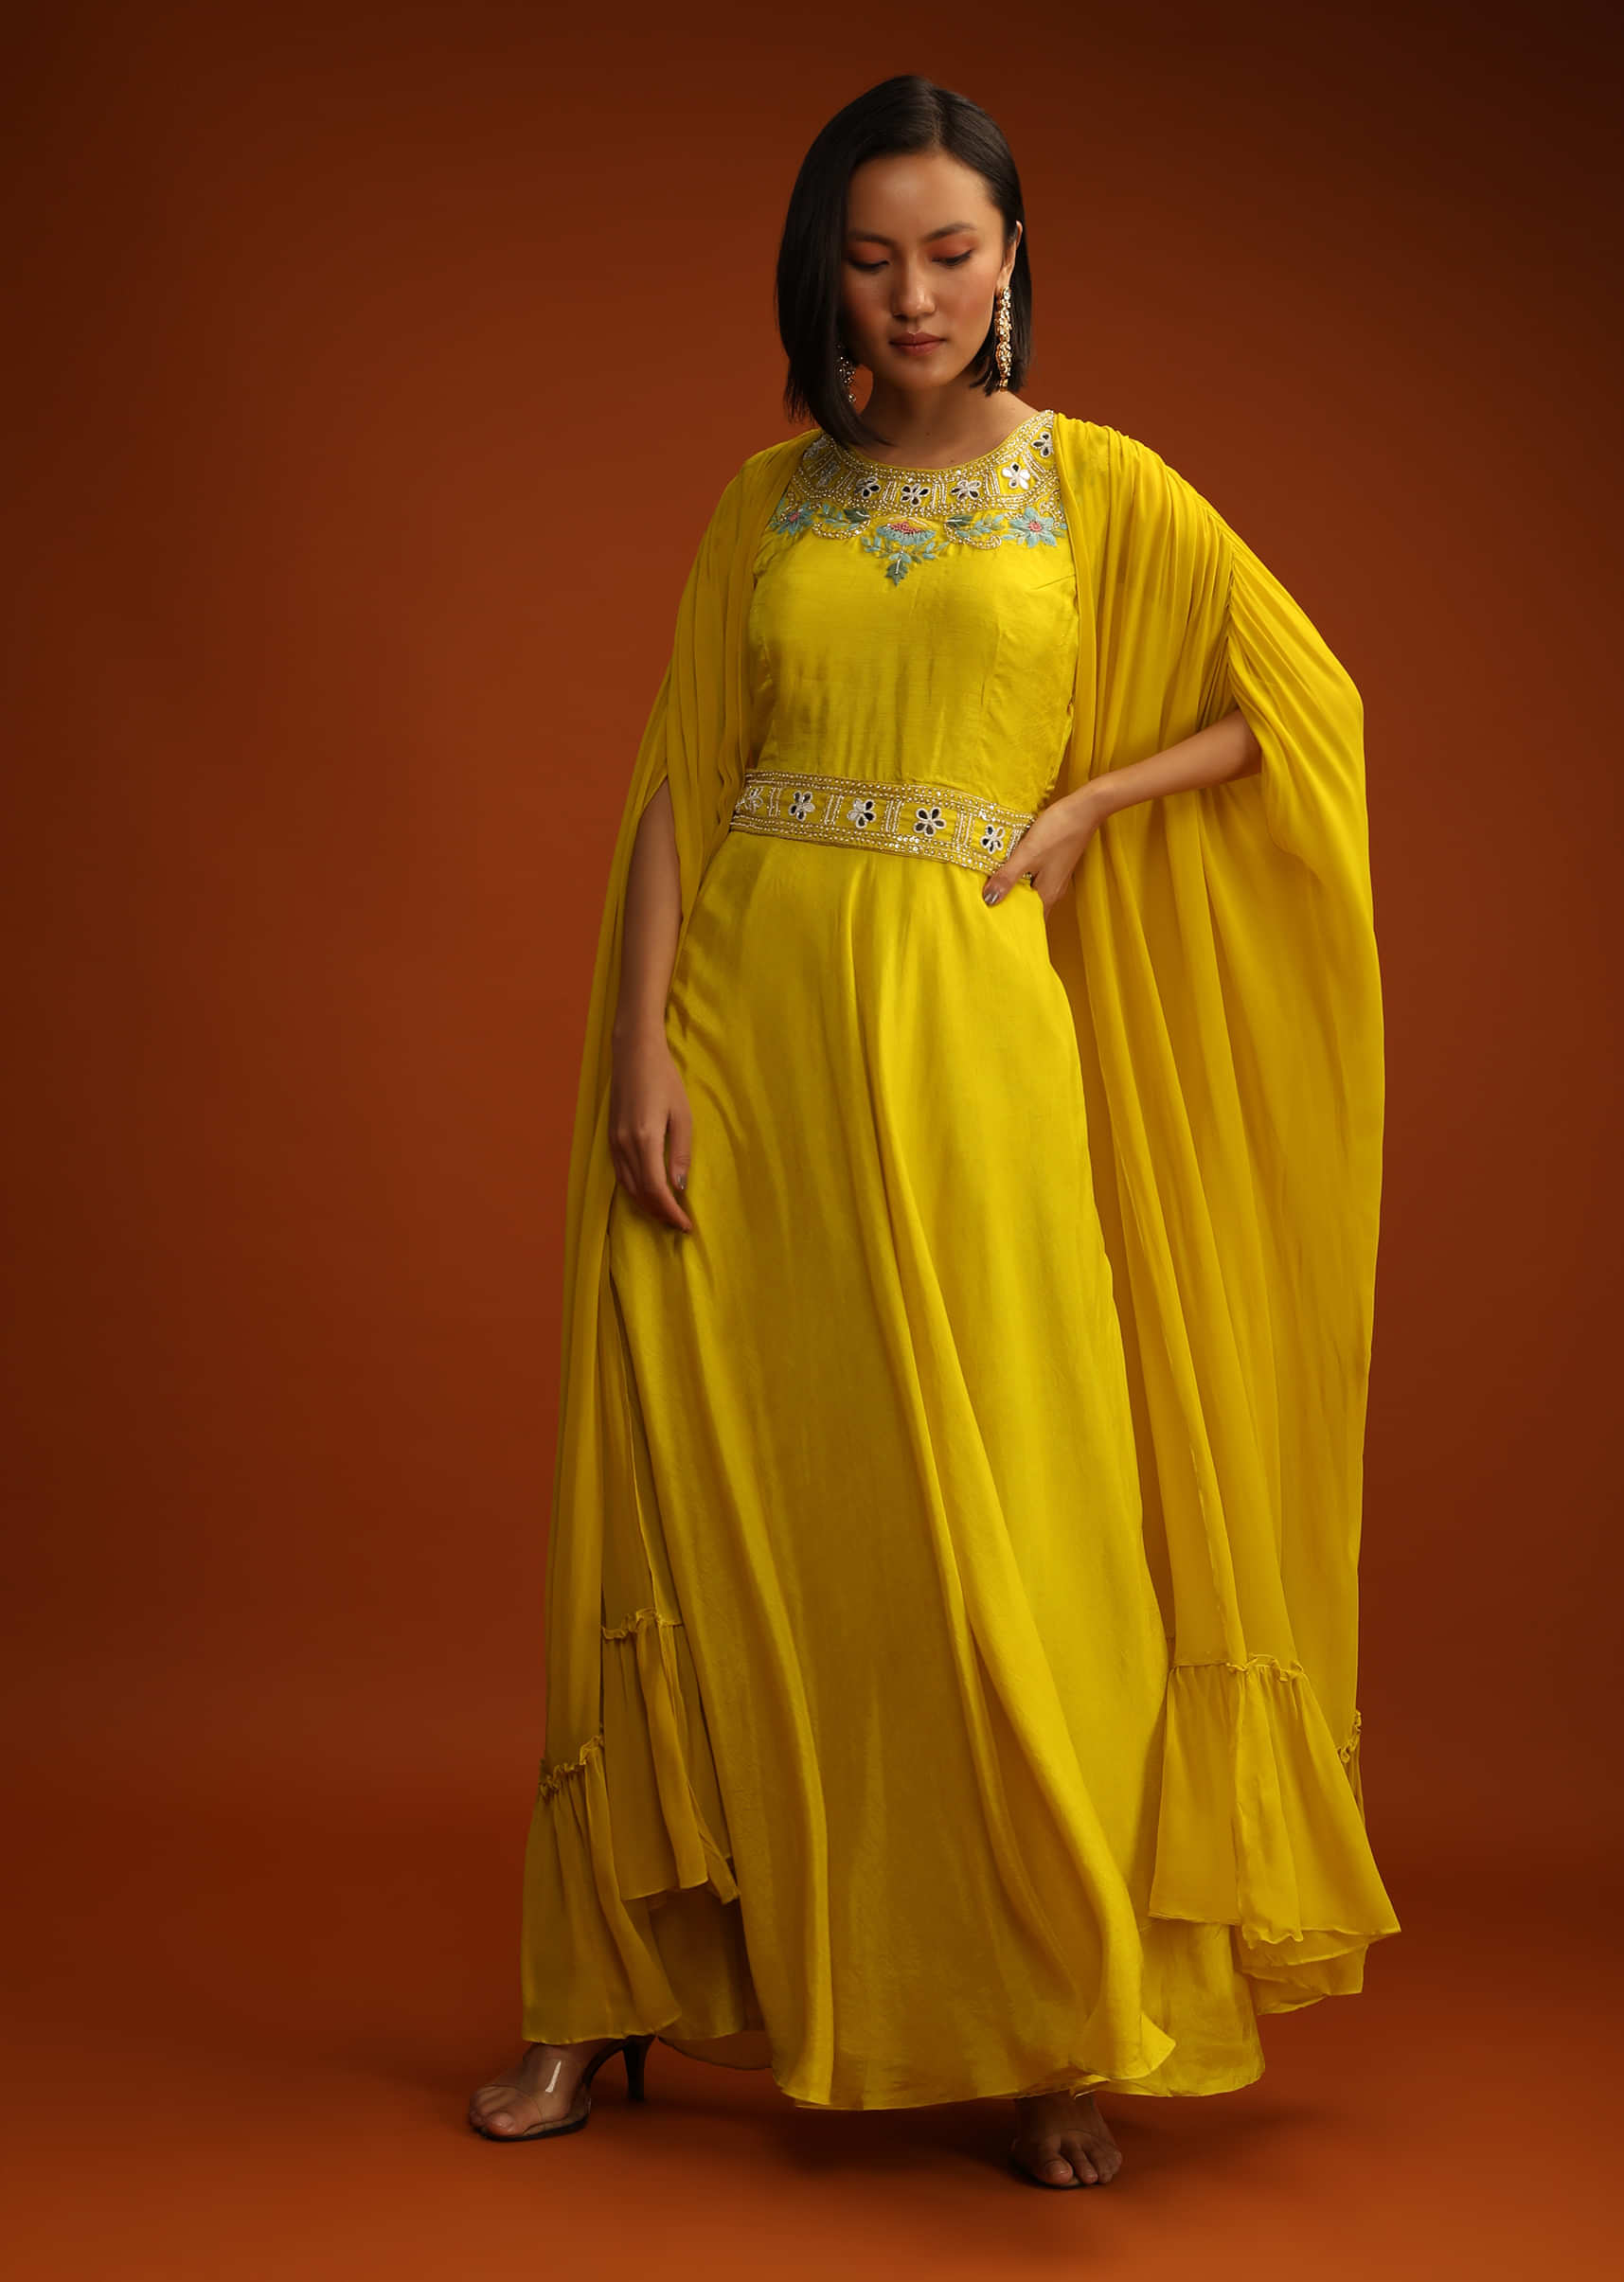 Mustard Yellow Indowestern Dress With Long Extended Cape Sleeves And Multi Colored Hand Embroidery